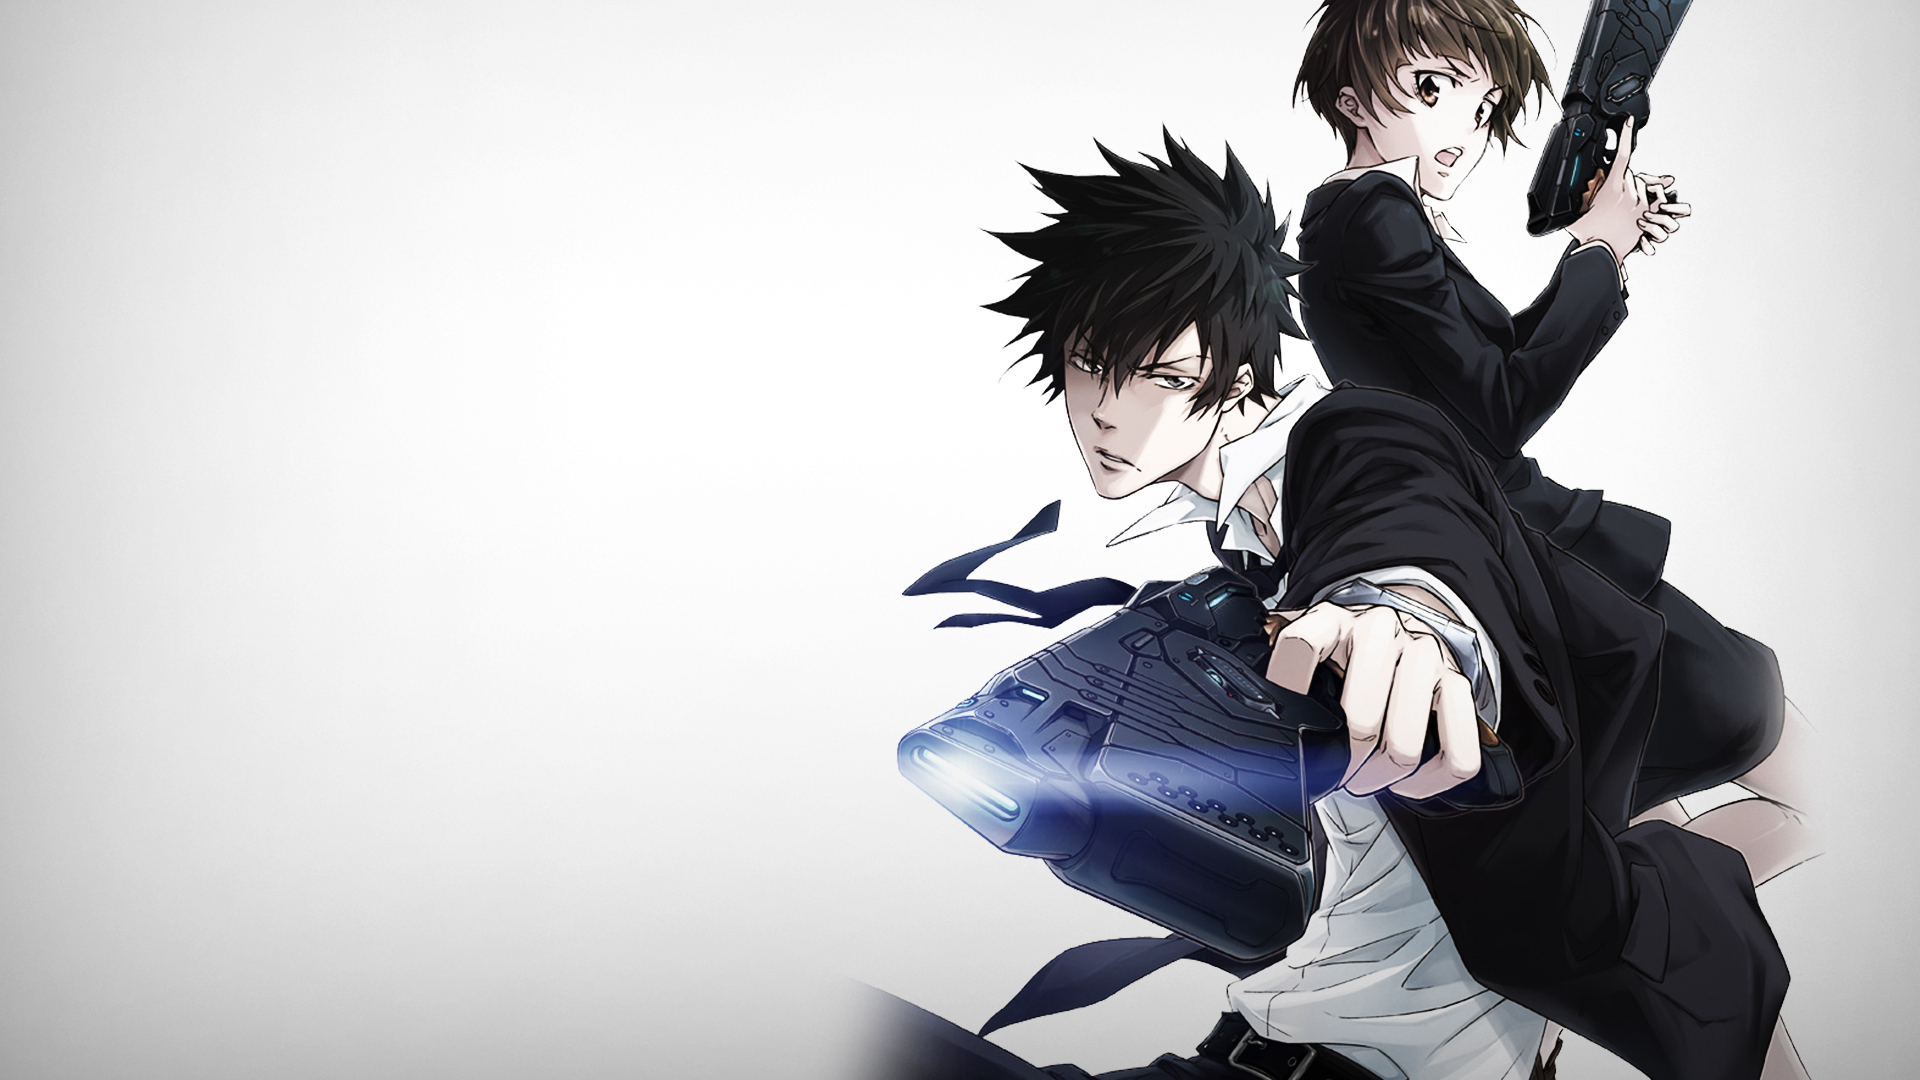 1920x1080 Free download Psycho Pass Wallpapers HD Download [] for your Desktop, Mobile \u0026 Tablet | Explore 78+ Psycho Wallpaper | American Psycho Wallpaper, Psycho Pass Wallpaper, Psycho Wallpapers Free Download